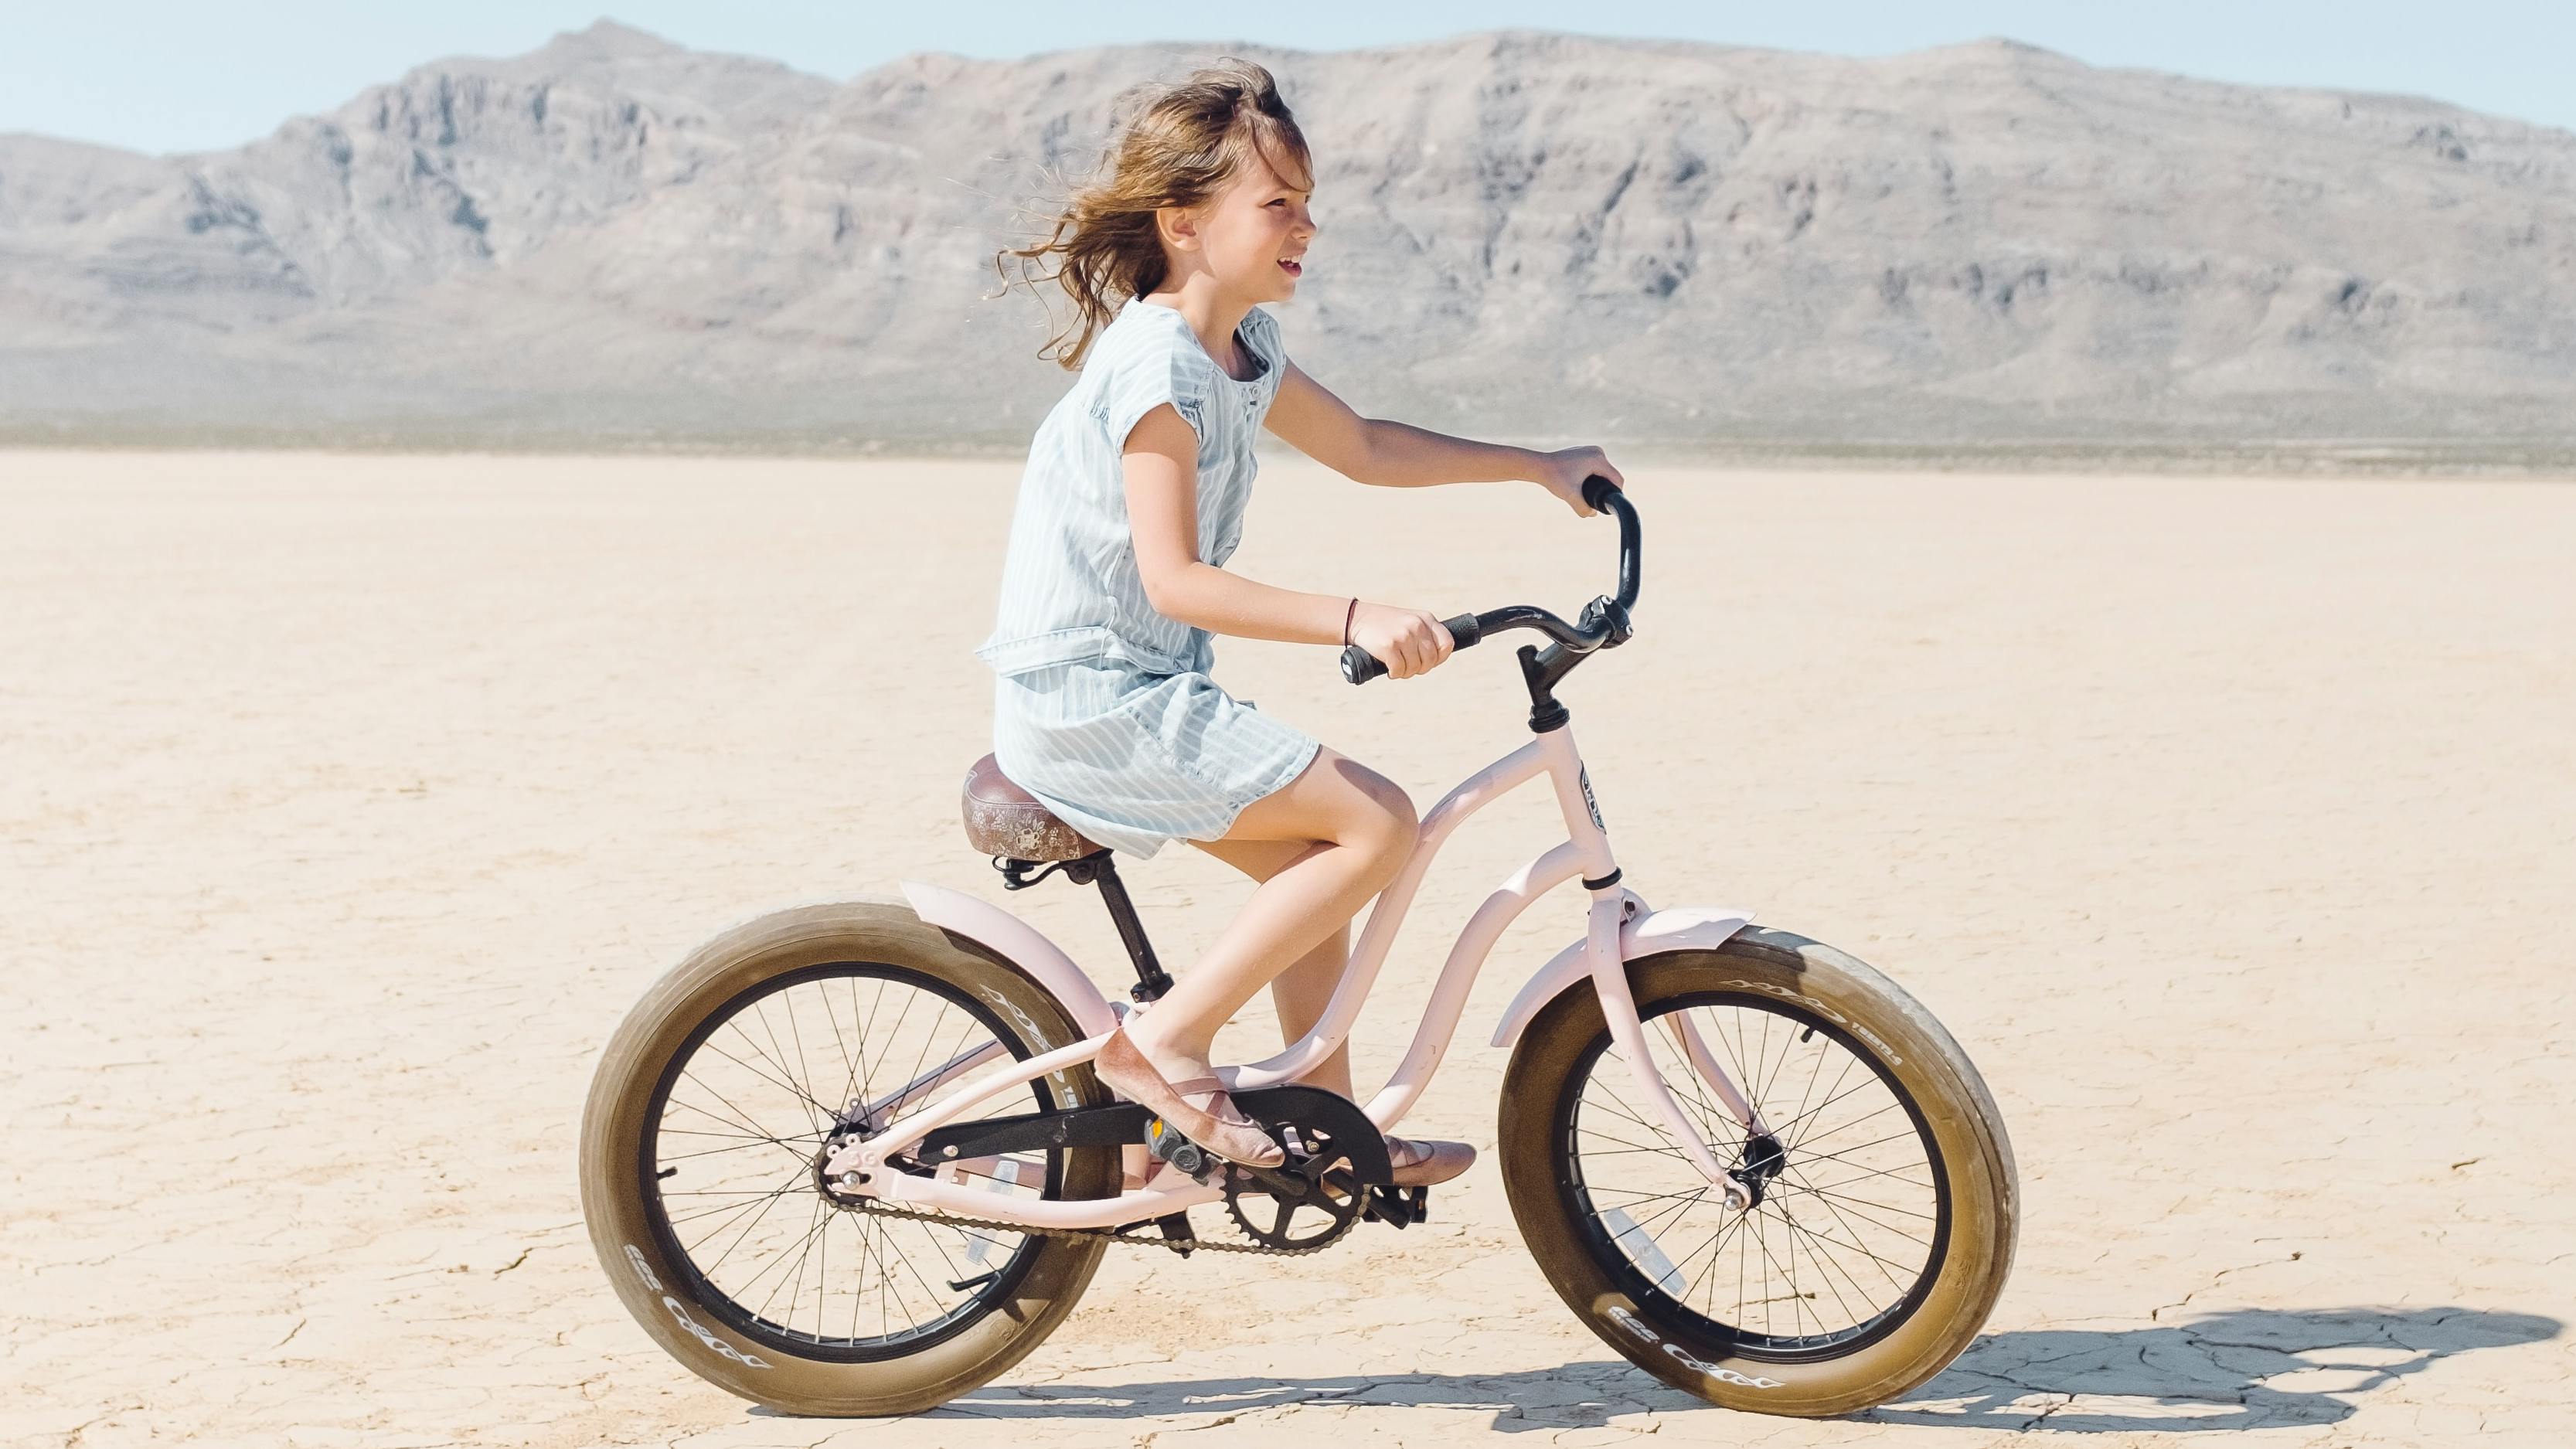 A girl rides a bike across a dried lake bed in a desert ecosystem. 